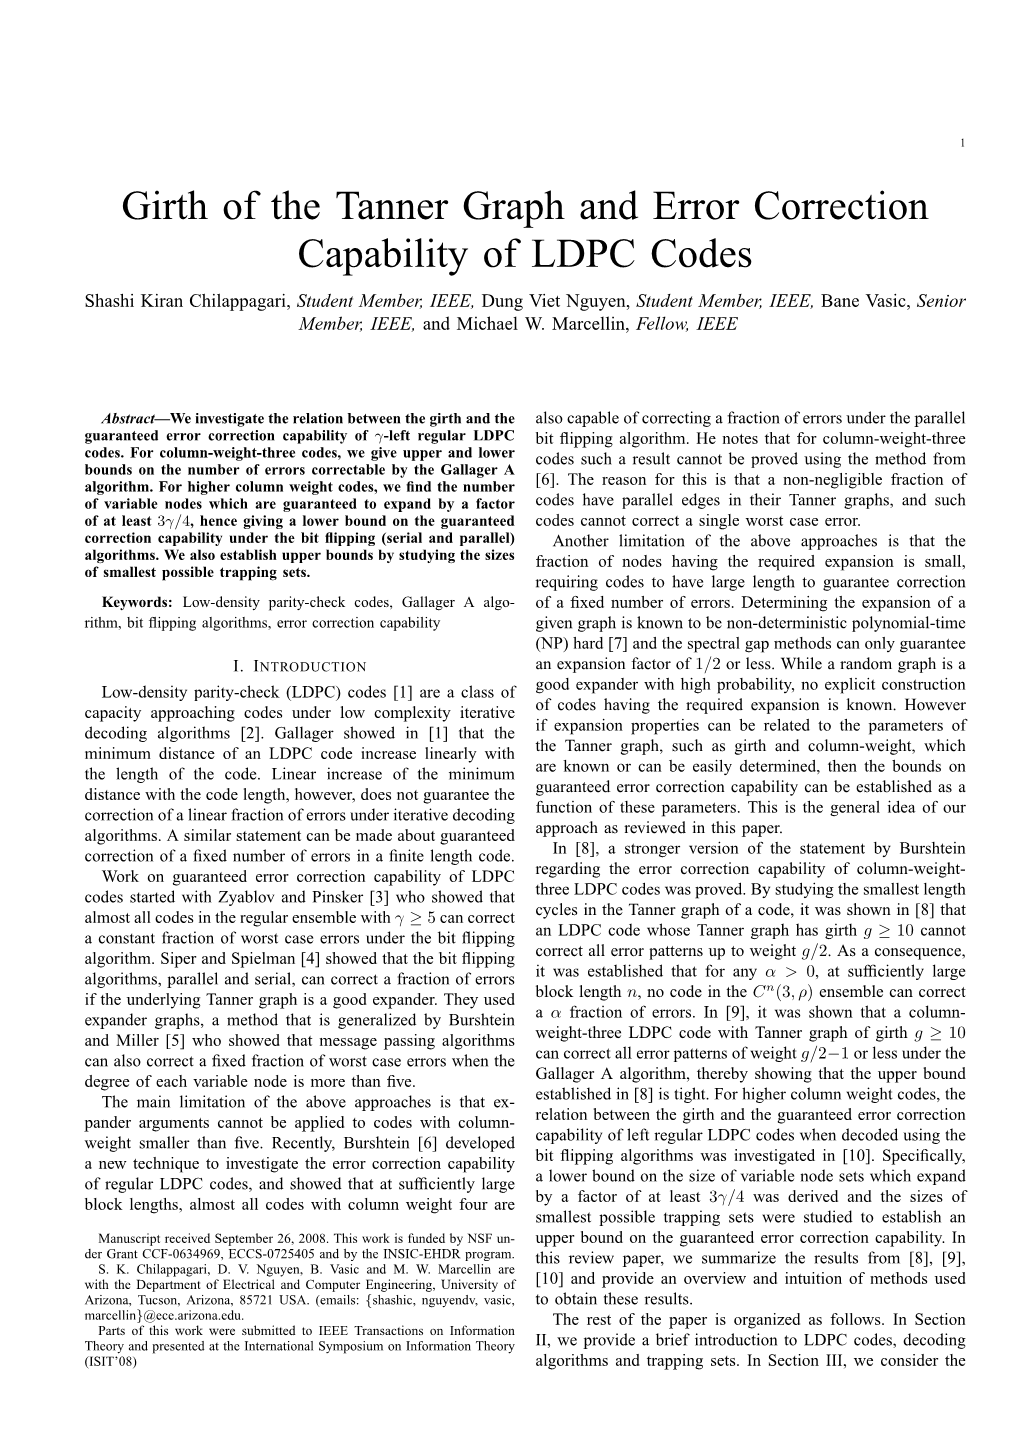 Girth of the Tanner Graph and Error Correction Capability of LDPC Codes